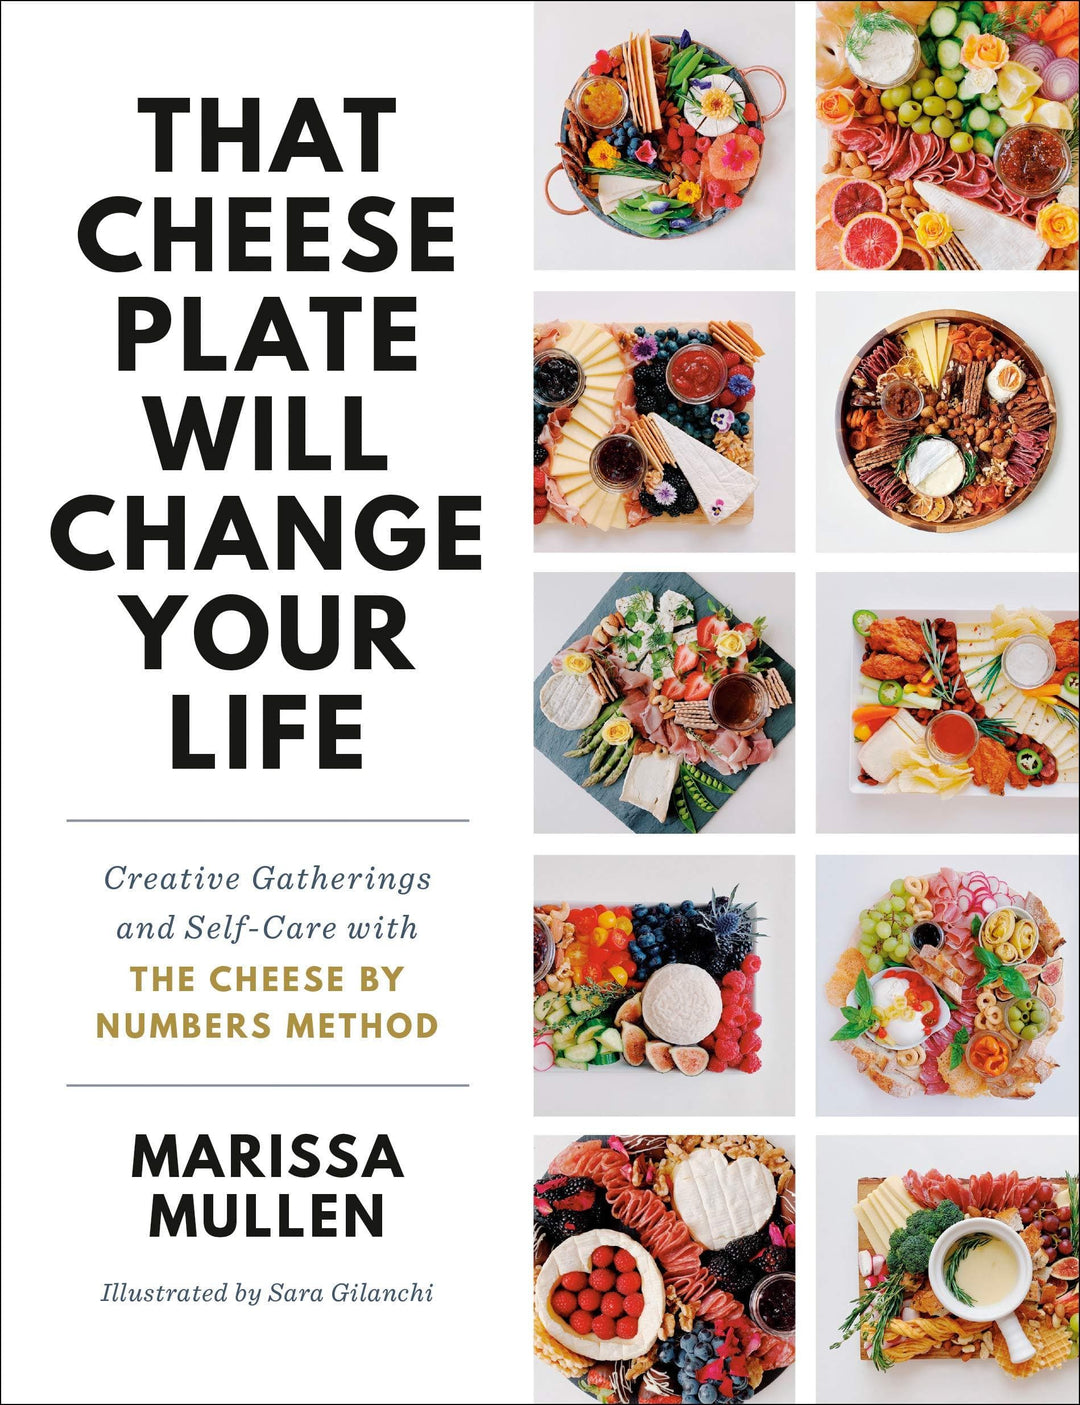 Penguin Random House cook book The Cheese Plate That Will Change Your Life